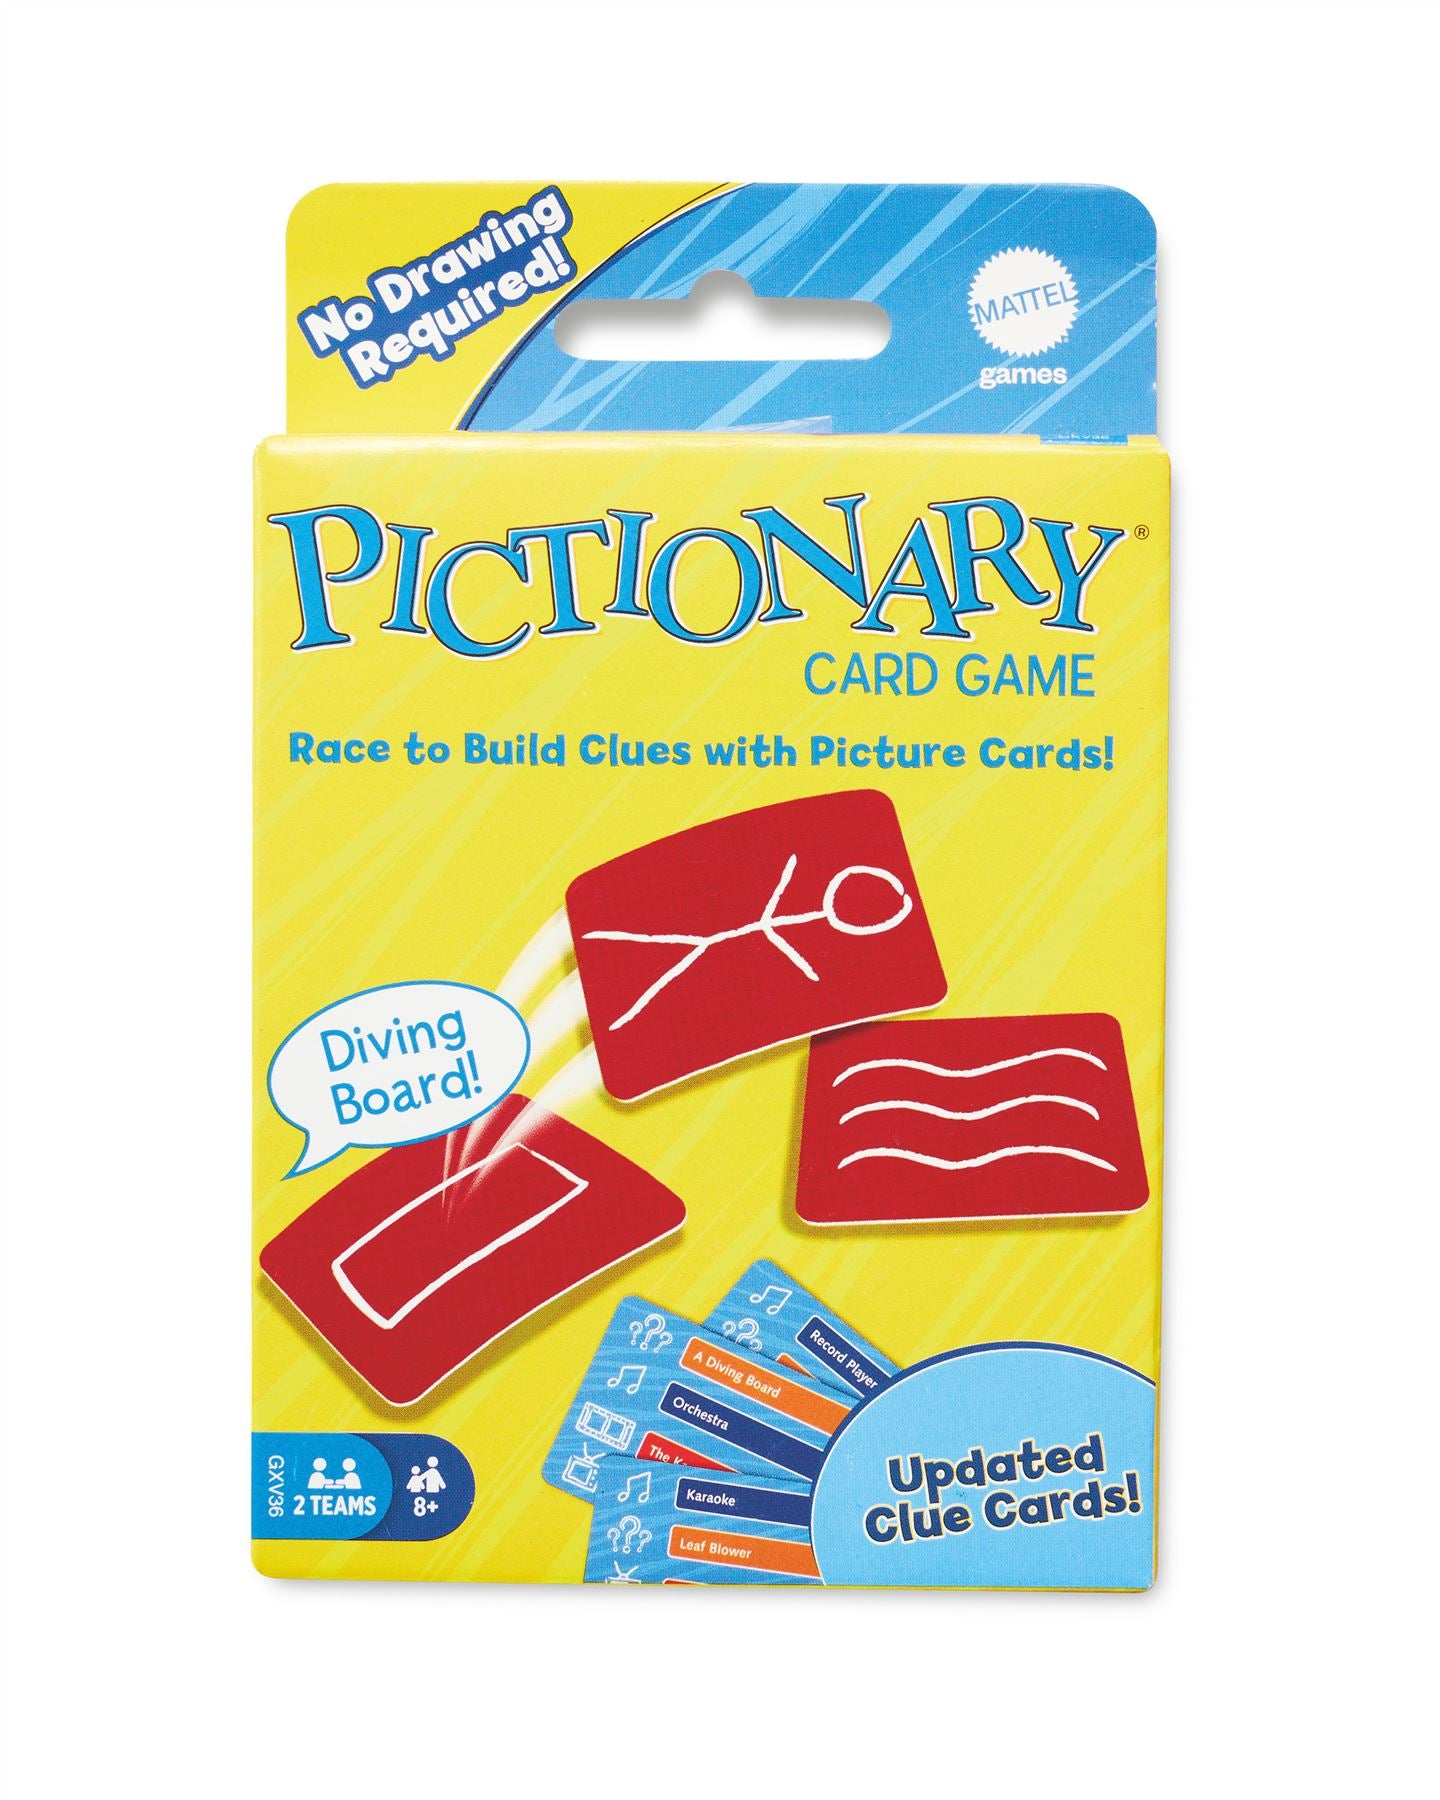 Pictionary Card Game GXV36 Family Fun Guessing